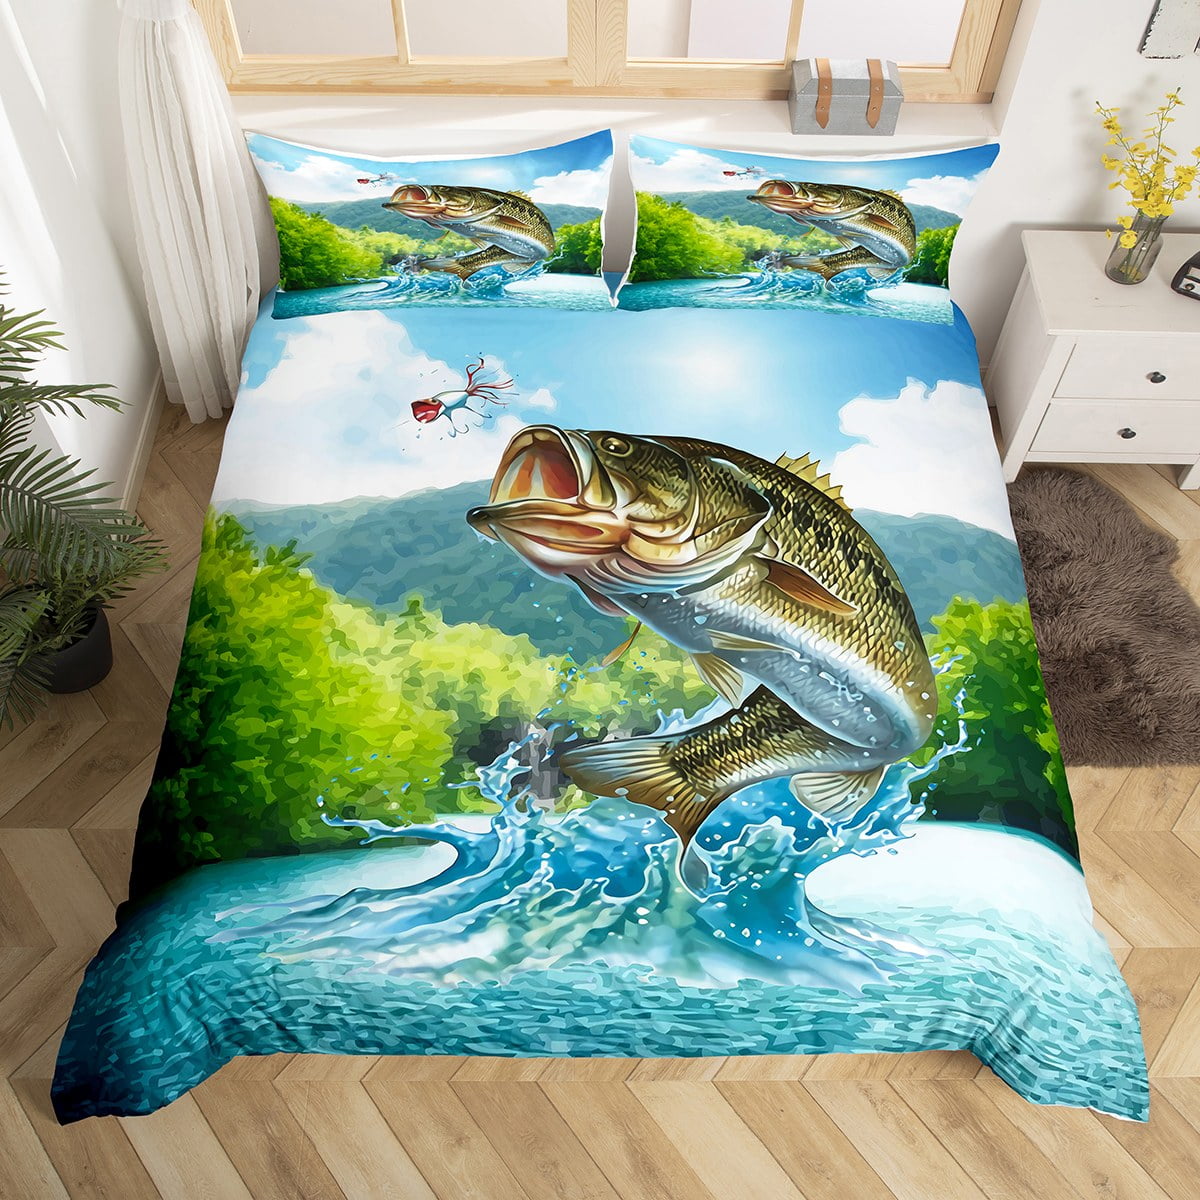  Fish Bedspread Set Fishing Gifts for Men,Ice Fishing Gear Quilt  Set Fishing Coverlet Set Retro Watercolor Wood Fishhook Coverlet Set  Twin,Angling Outdoor Sports Rustic Home Decor Gift for Fisherman : Home